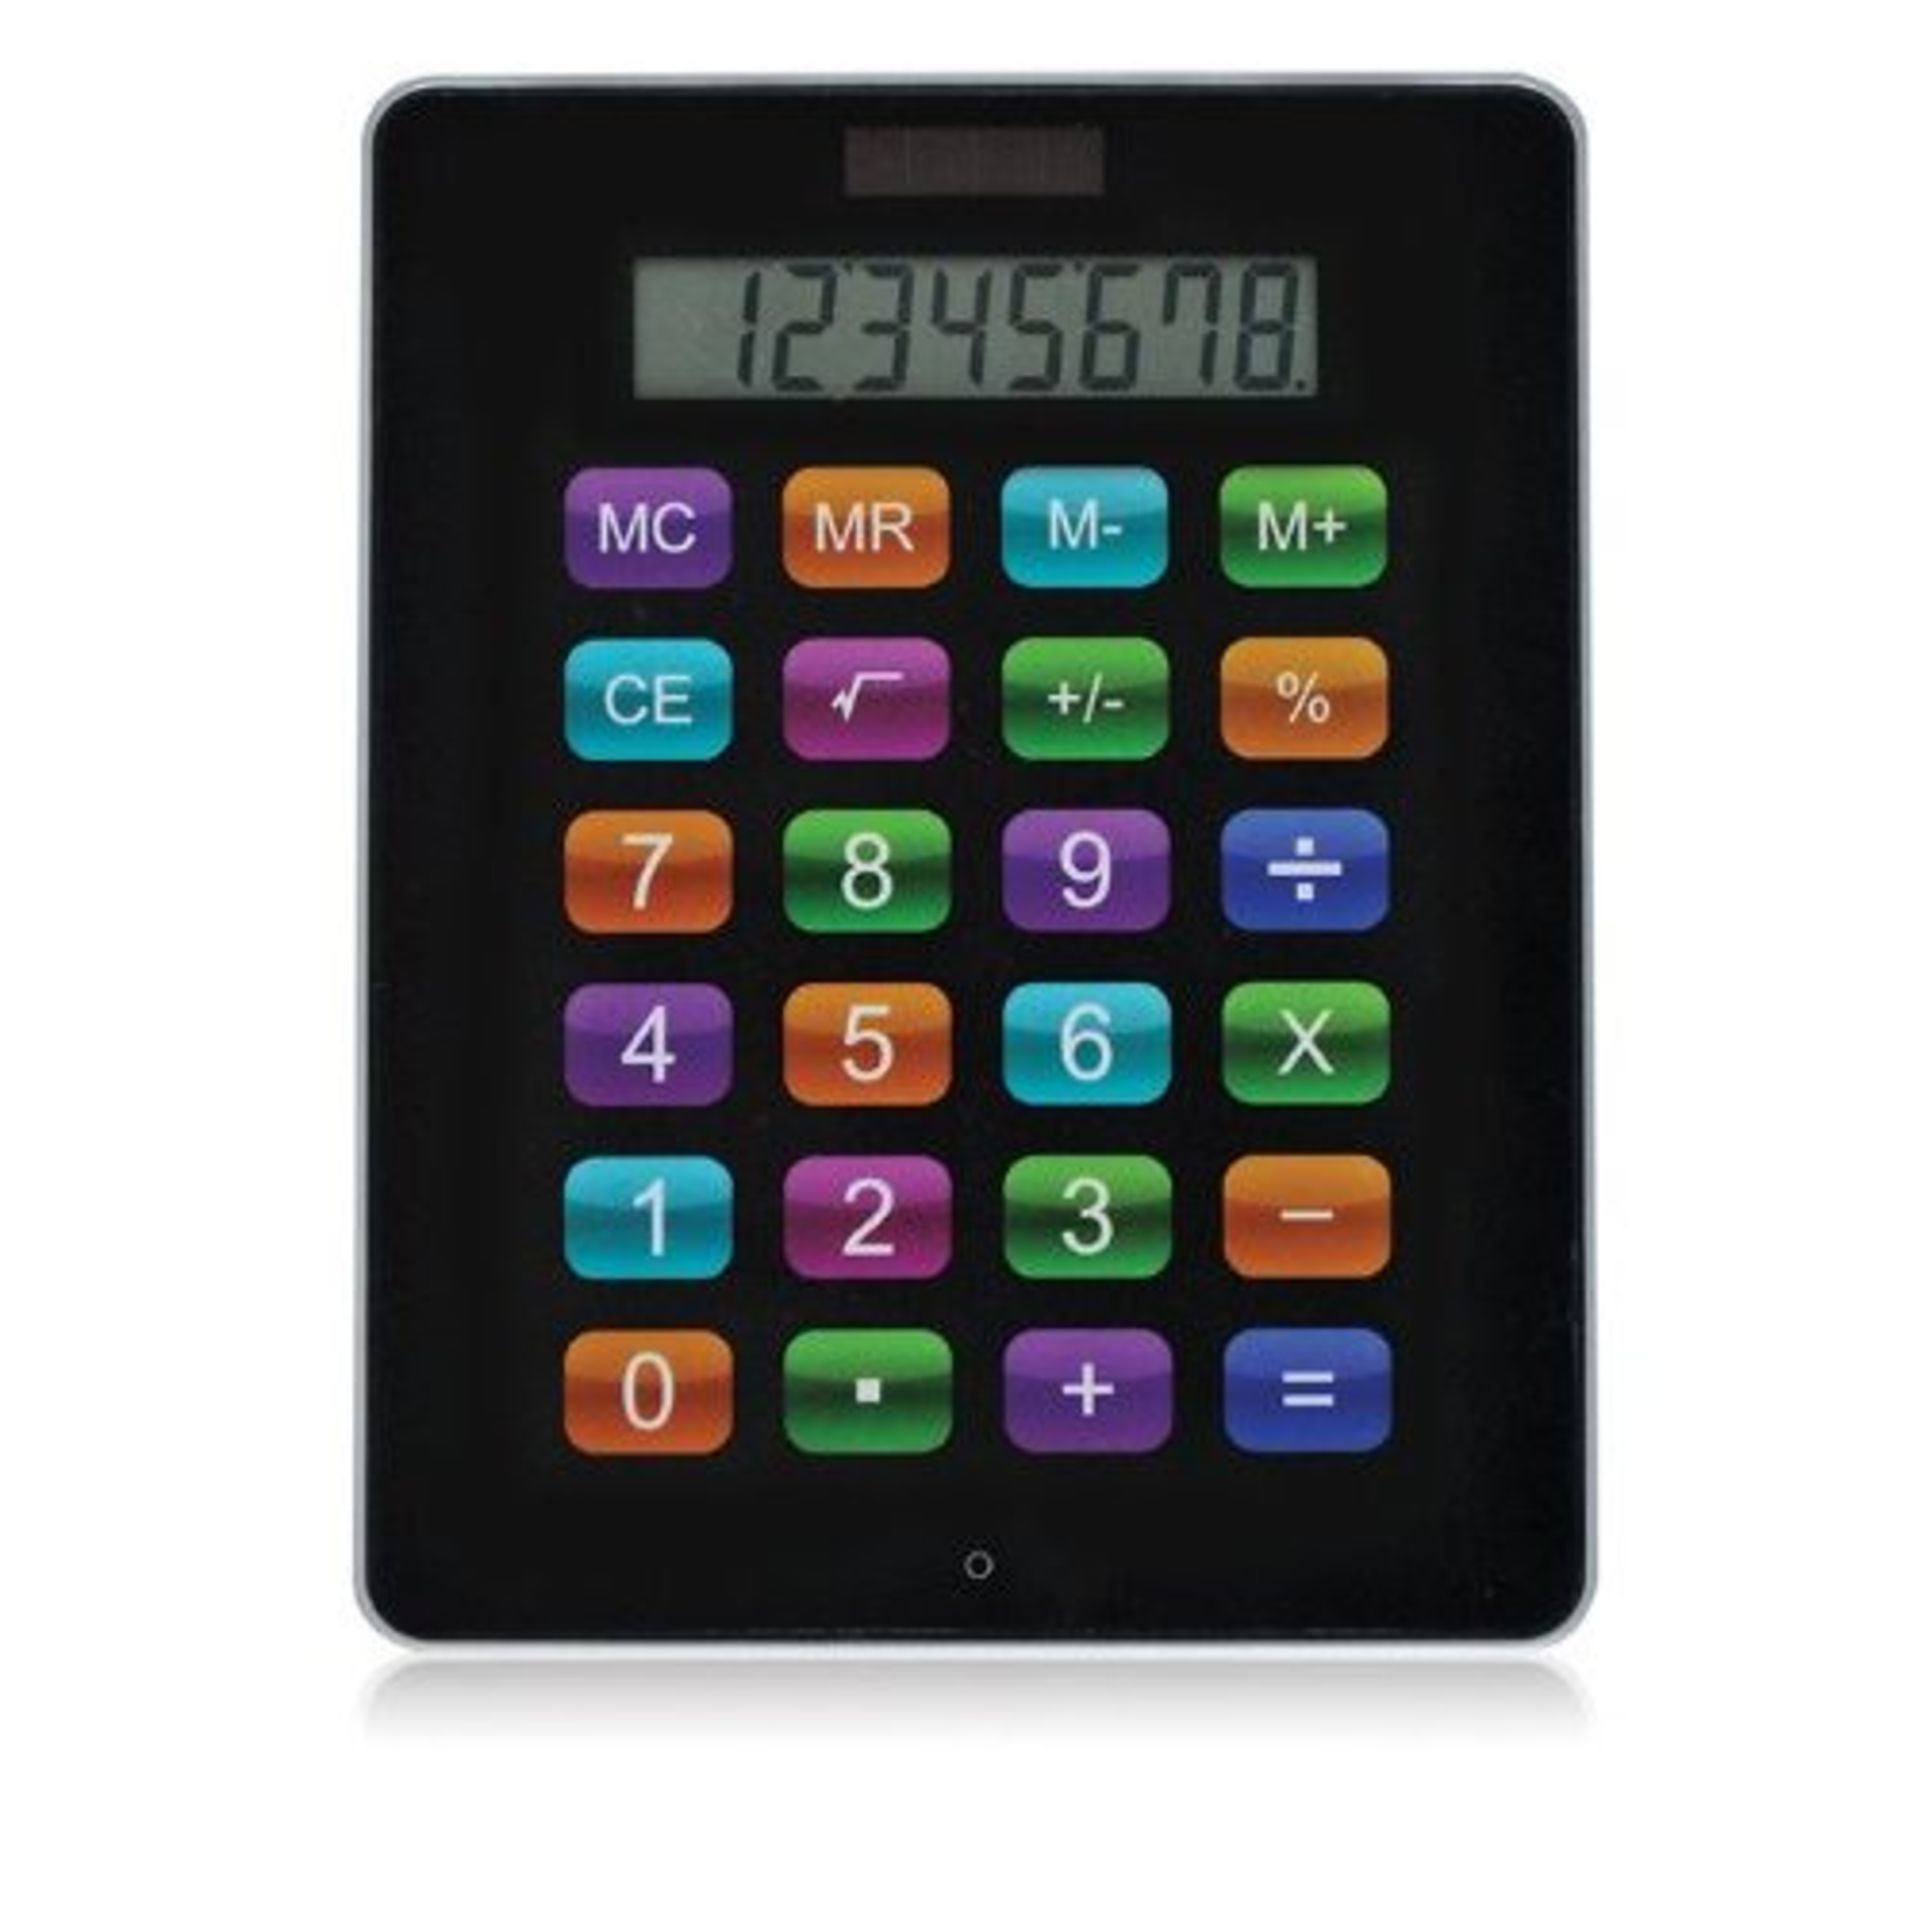 V Brand New Ipad Calculator-Battery powered with solar backup X 3 Bid price to be multiplied by - Image 2 of 4